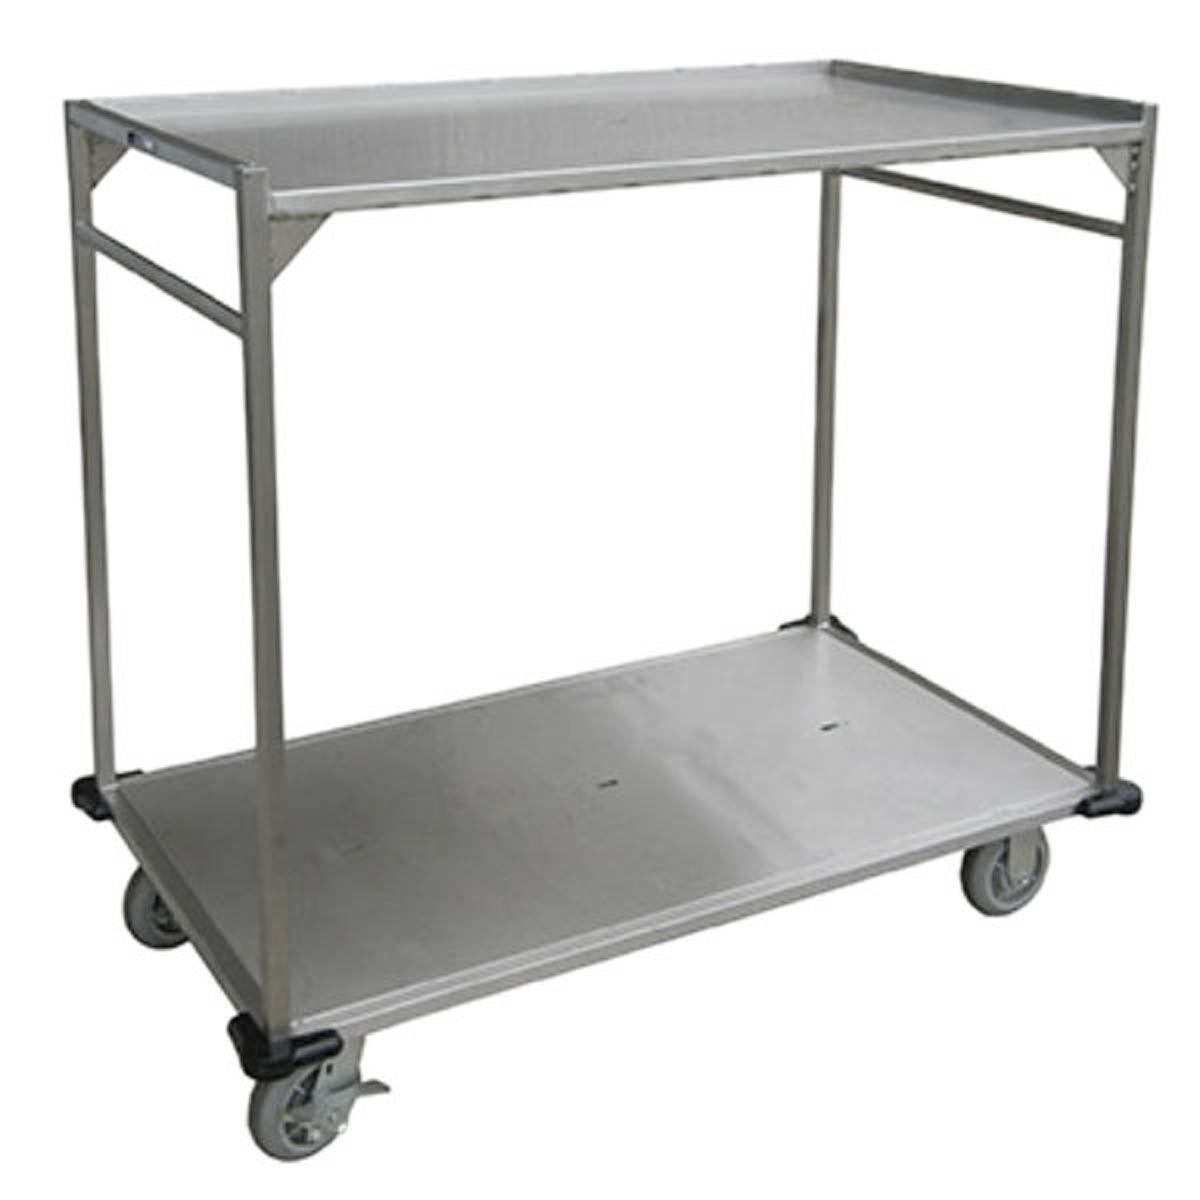 Lakeside PB37 39″ Tray Delivery Cart